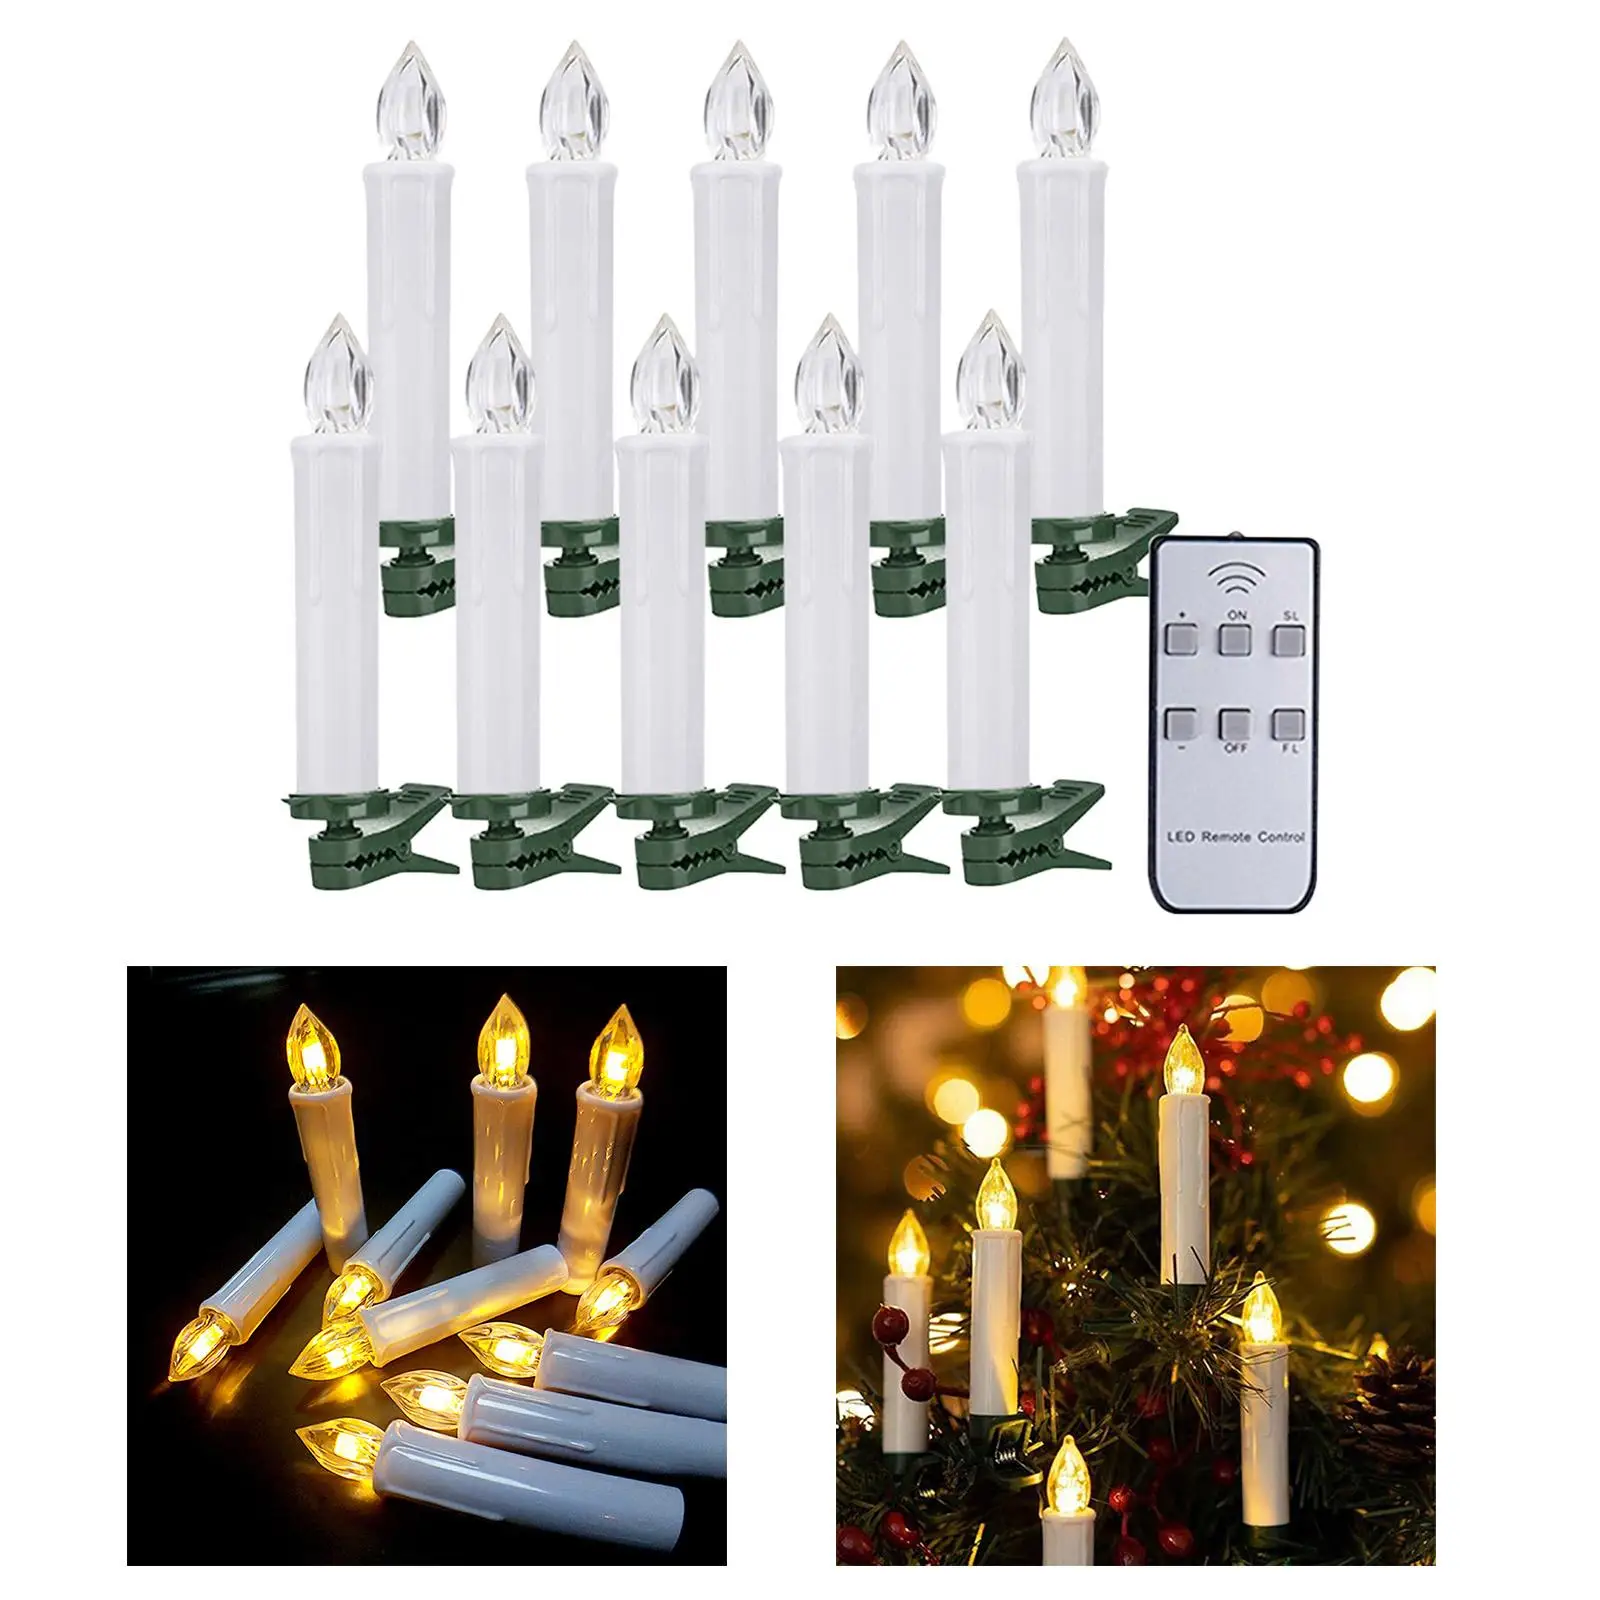 10pcs LED Taper Candles Light, Battery Powered Flameless Candles with Clips for Chirstmas Tree Party Wedding Decoration Gift